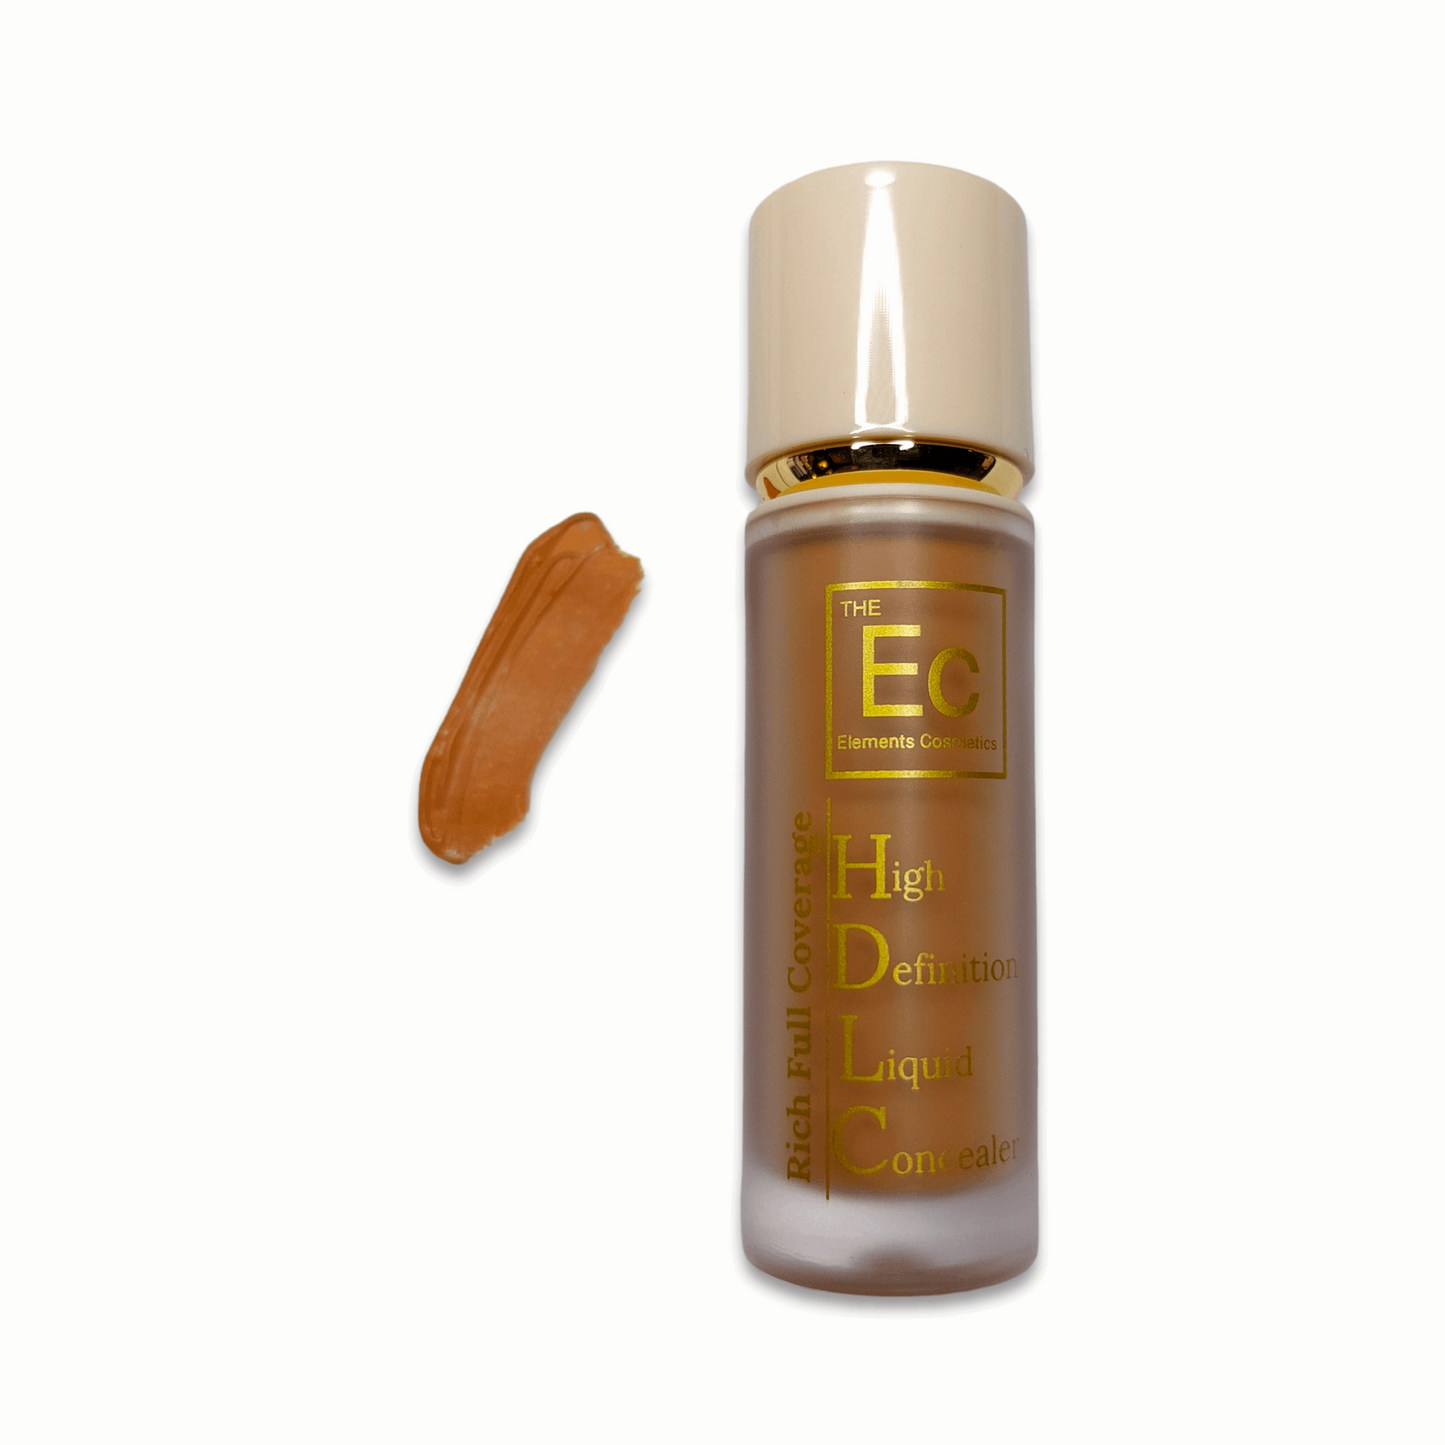 High-Definition Liquid Concealers